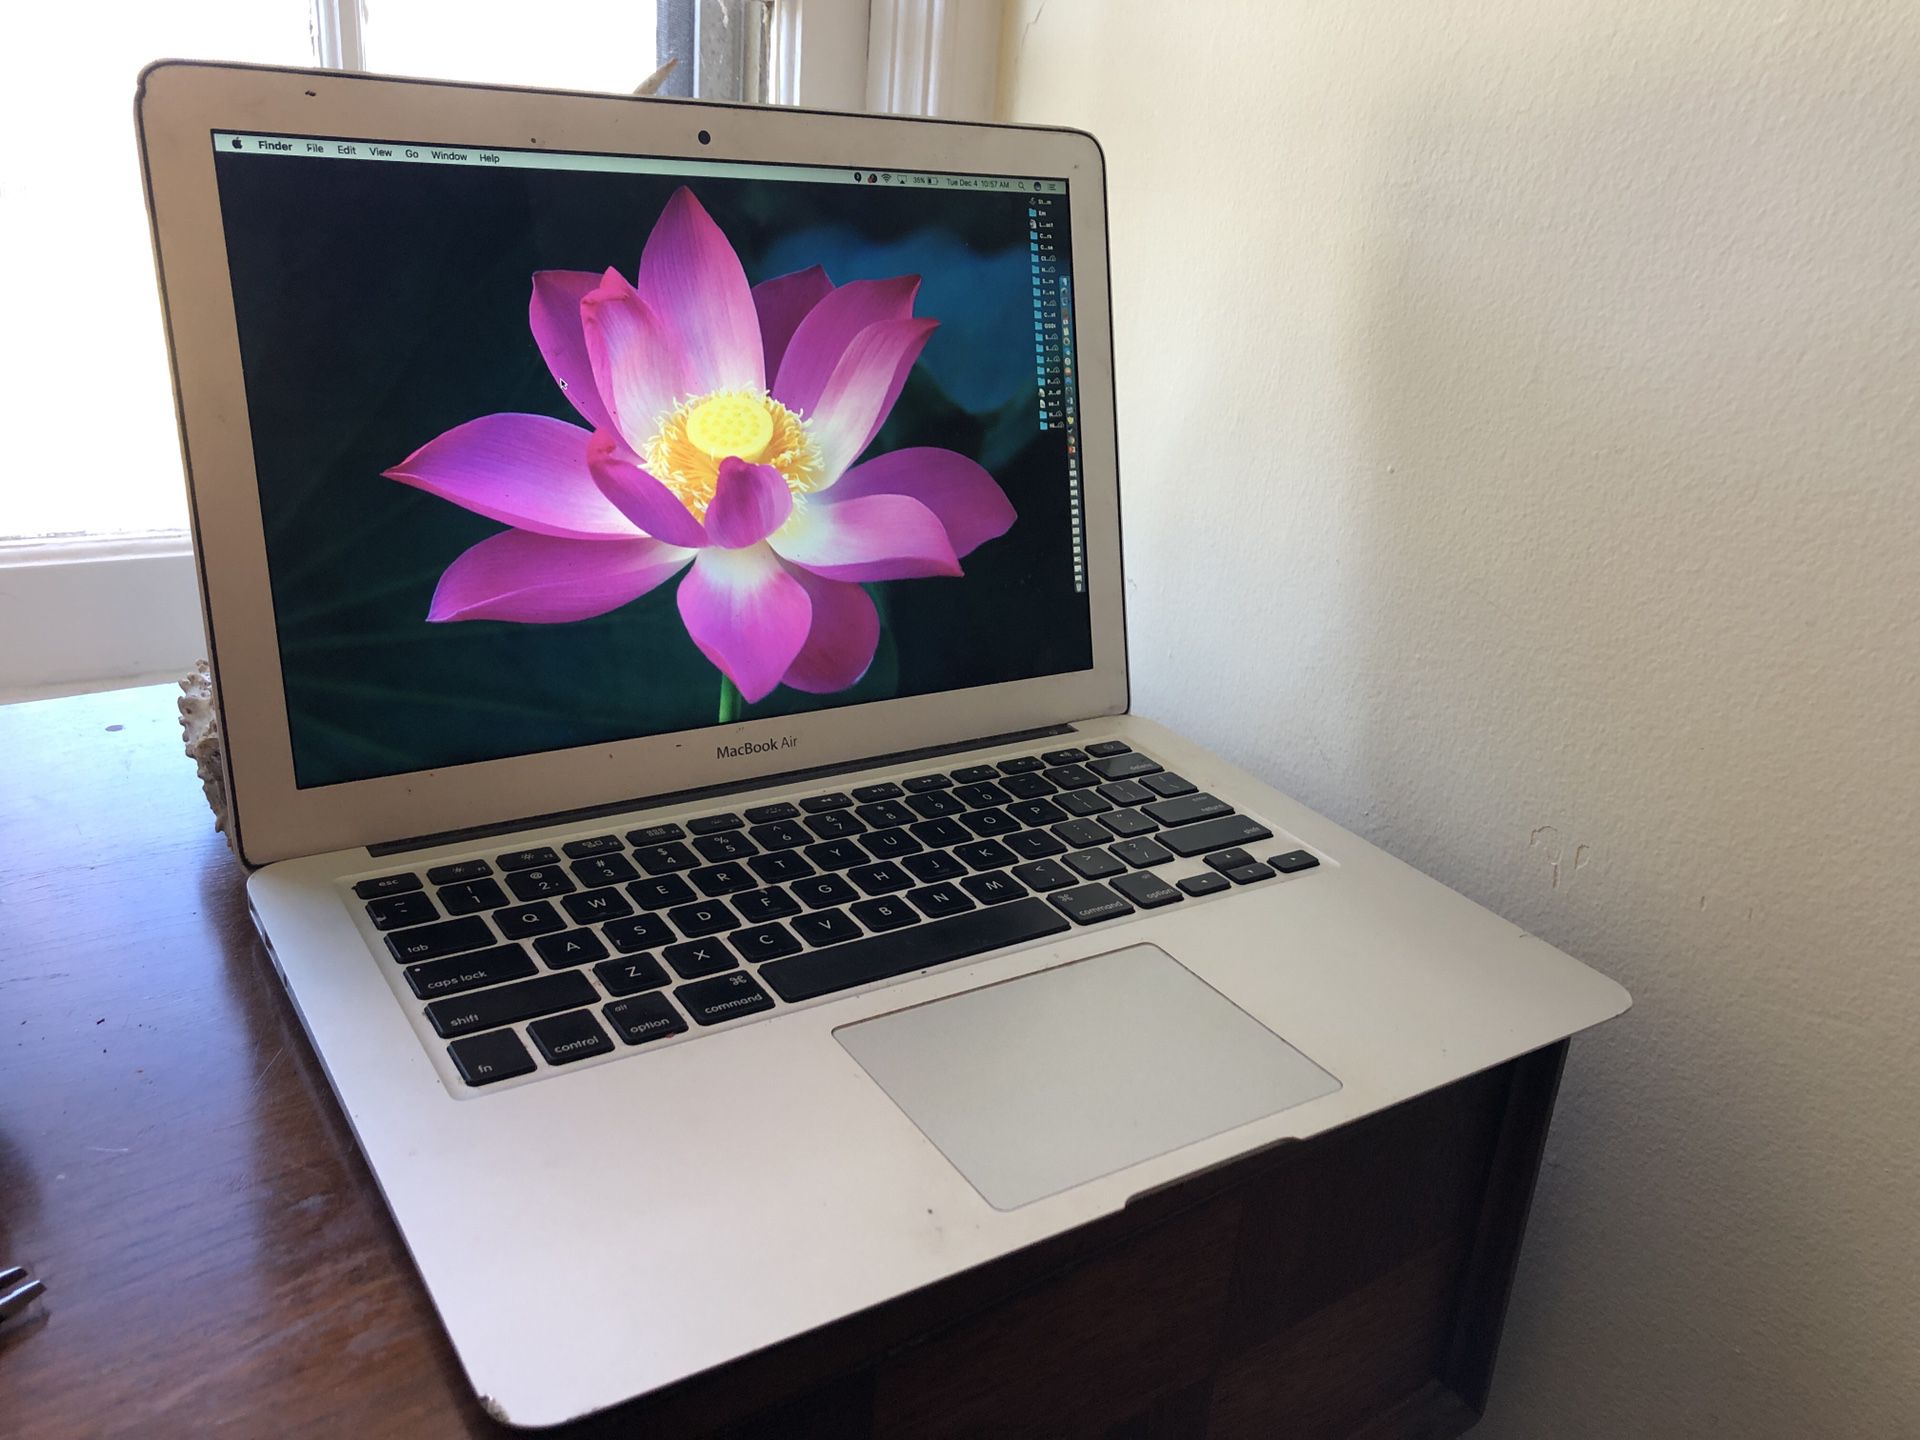 MacBook Air 13” with Bluetooth keyboard and mouse